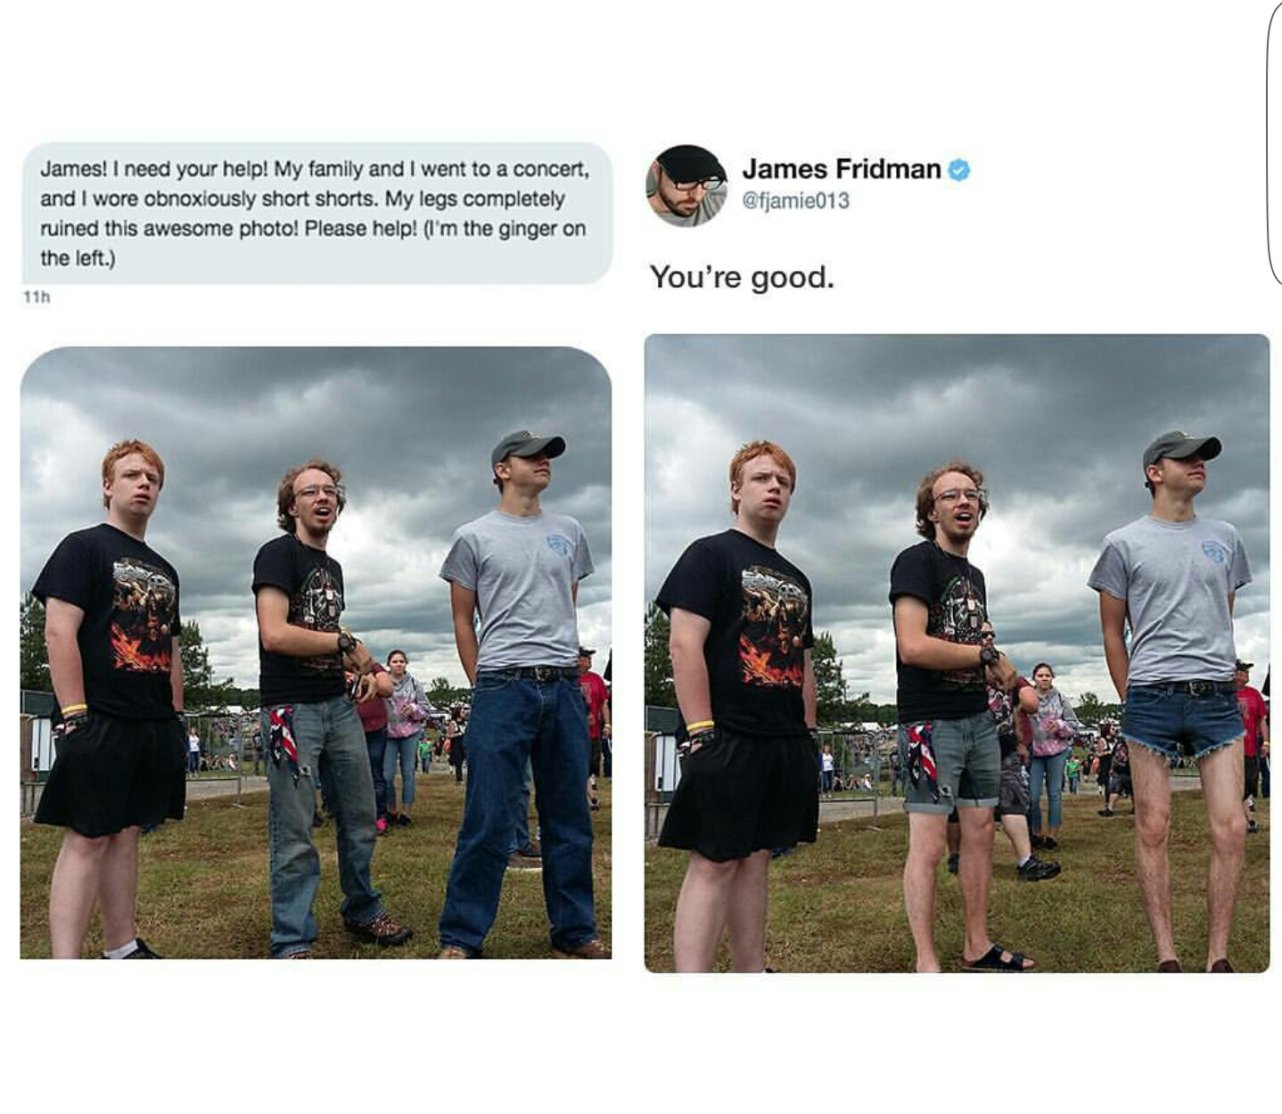 james fridman - James Fridman James! I need your help! My family and I went to a concert, and I wore obnoxiously short shorts. My legs completely ruined this awesome photo! Please help! I'm the ginger on the left. You're good. 11h